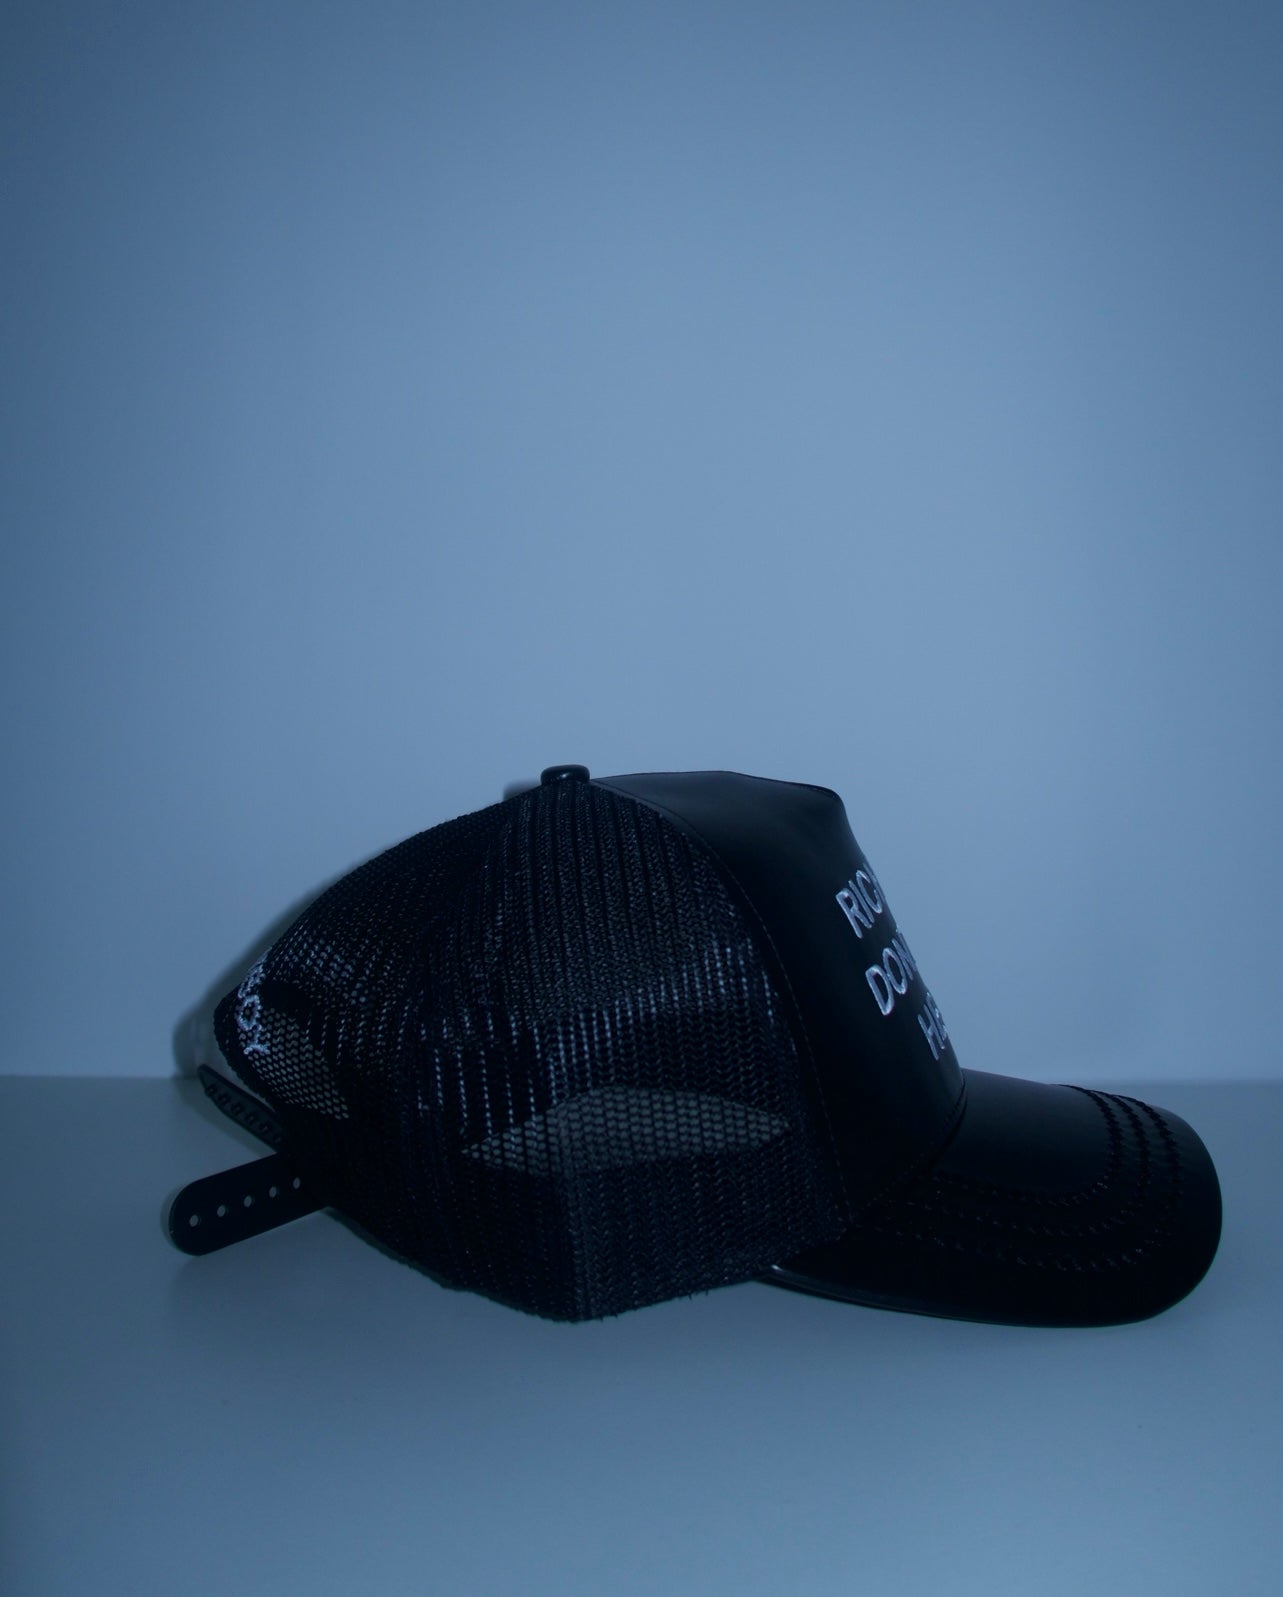 Black Leather Rich Boys Dont Have Hearts TRUCKER HAT